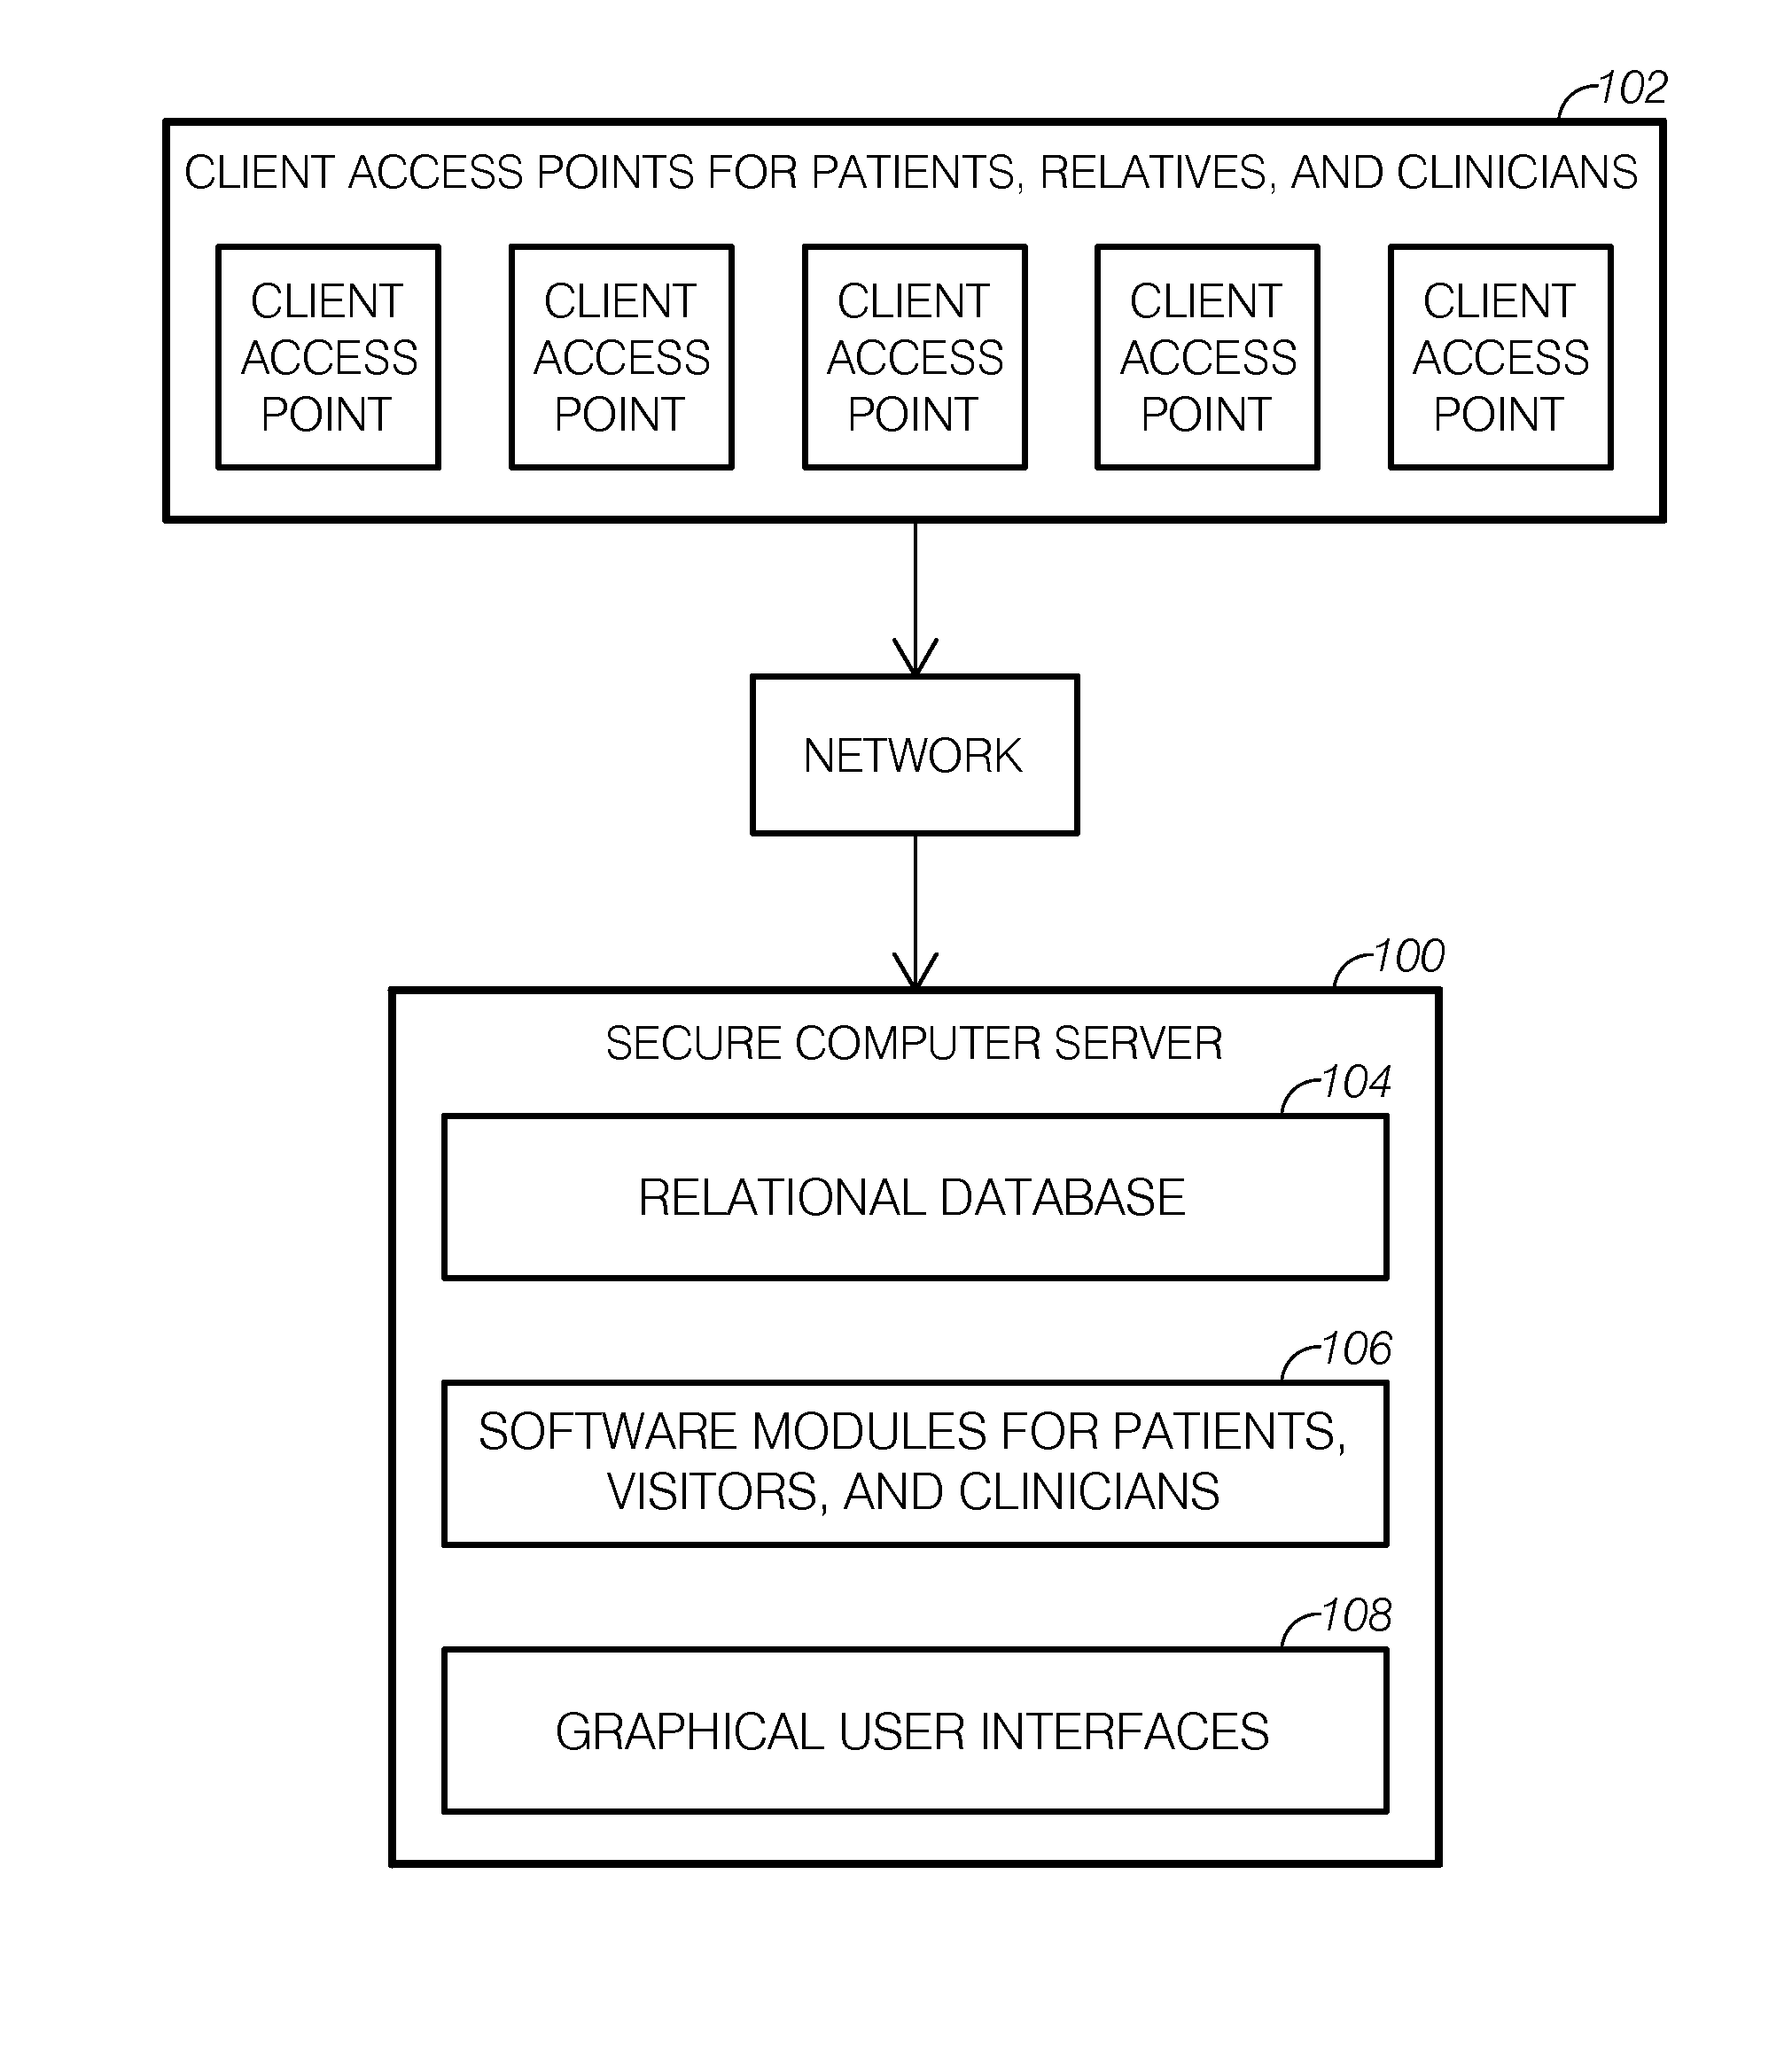 Communication system for remote patient visits and clinical status monitoring